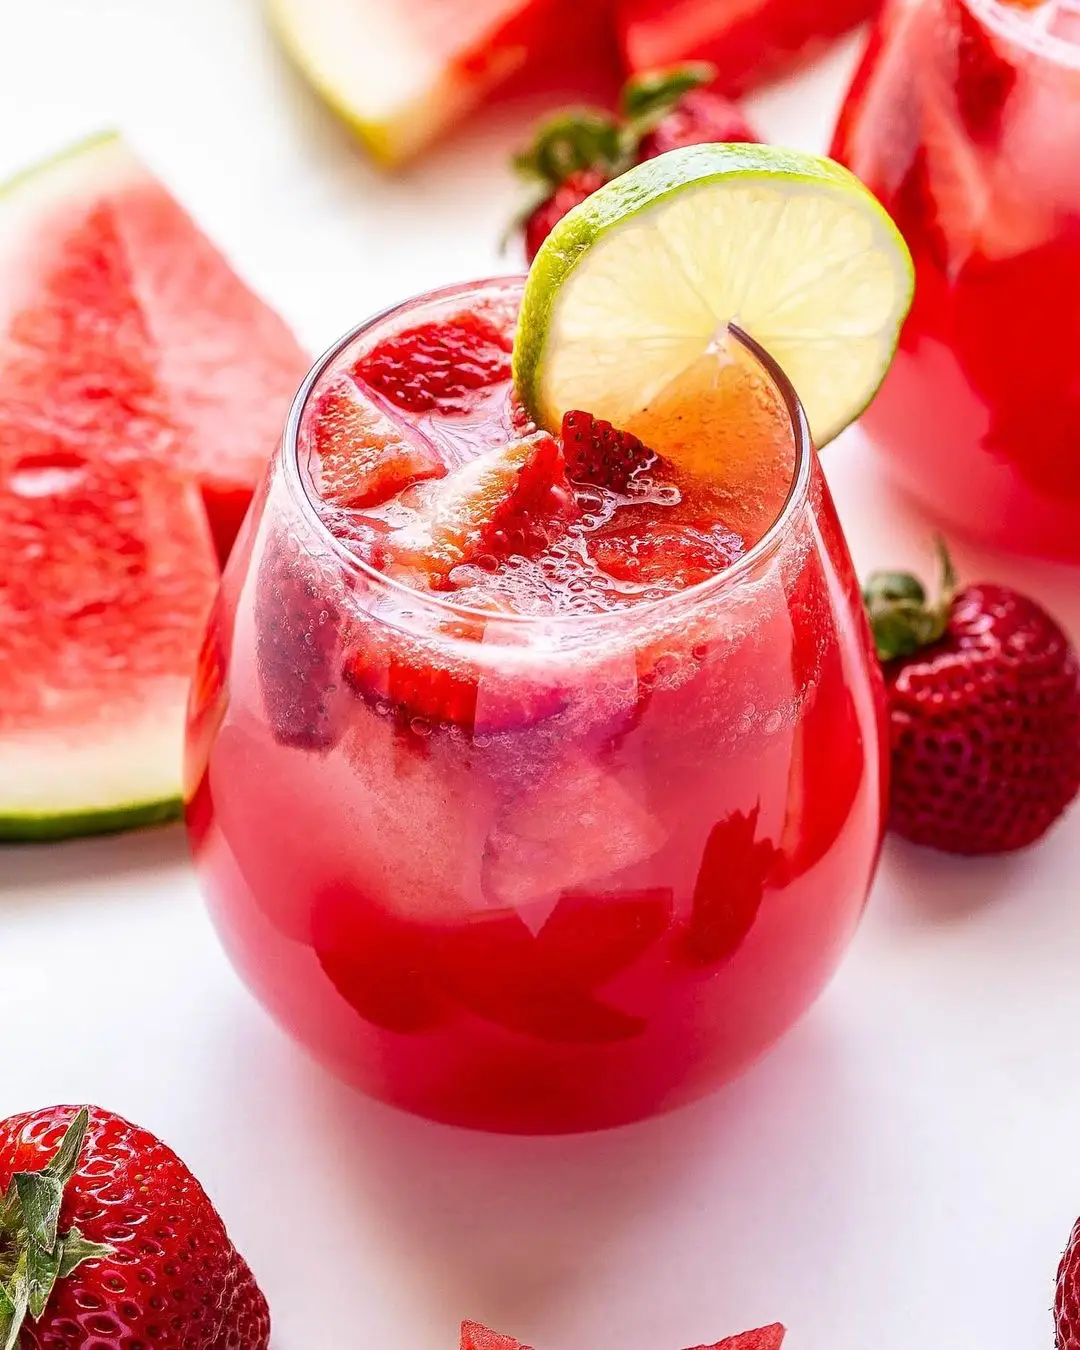 27 Super-Sweet Ways to Use up All That Juicy Watermelon ...